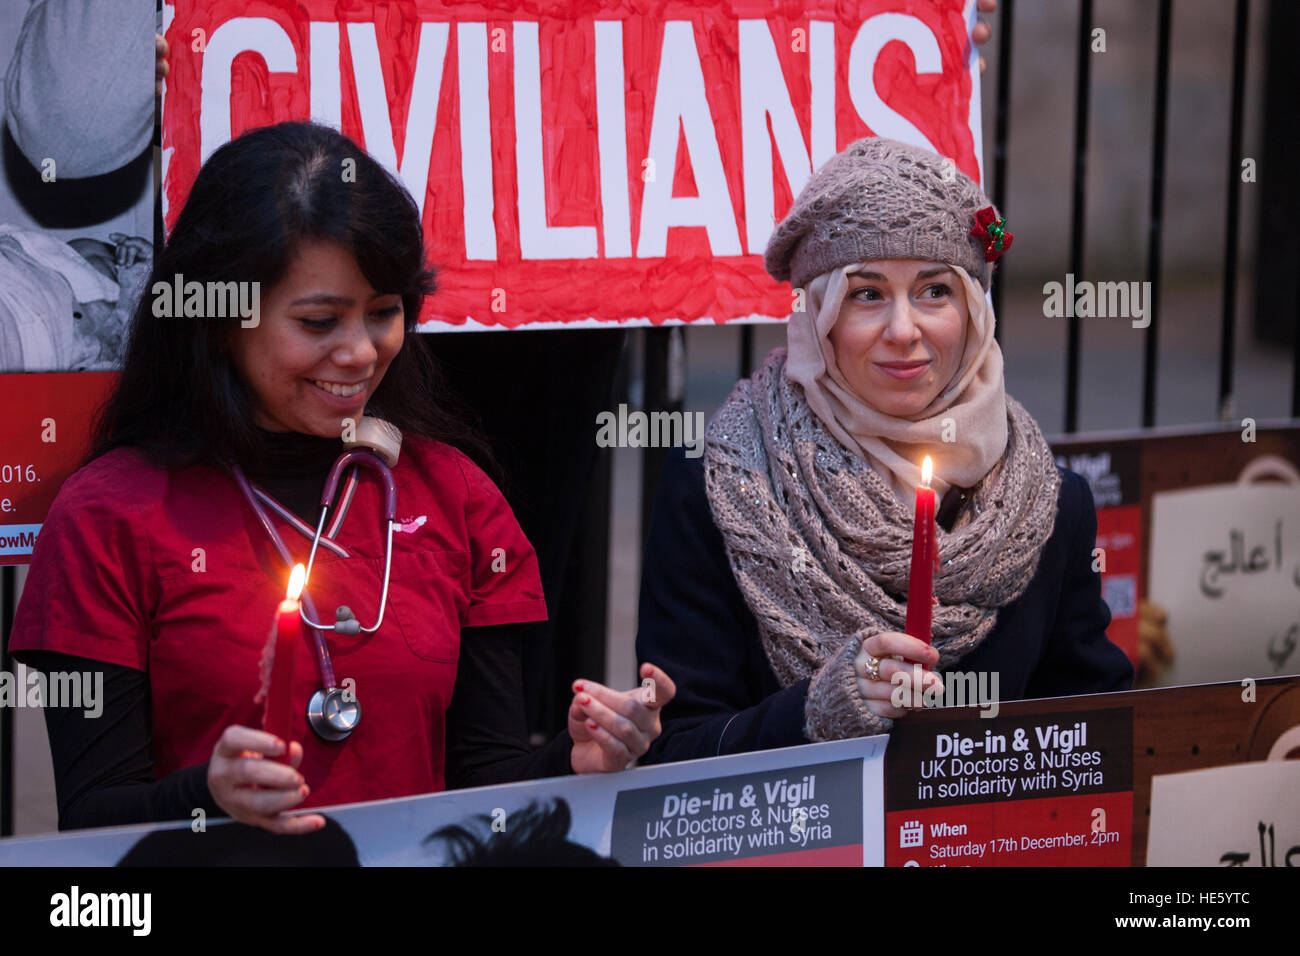 London, UK. 17th Dec, 2016. British doctors and nurses hold a candlelit vigil opposite Downing Street in solidarity with the people of Syria. Credit: Mark Kerrison/Alamy Live News Stock Photo